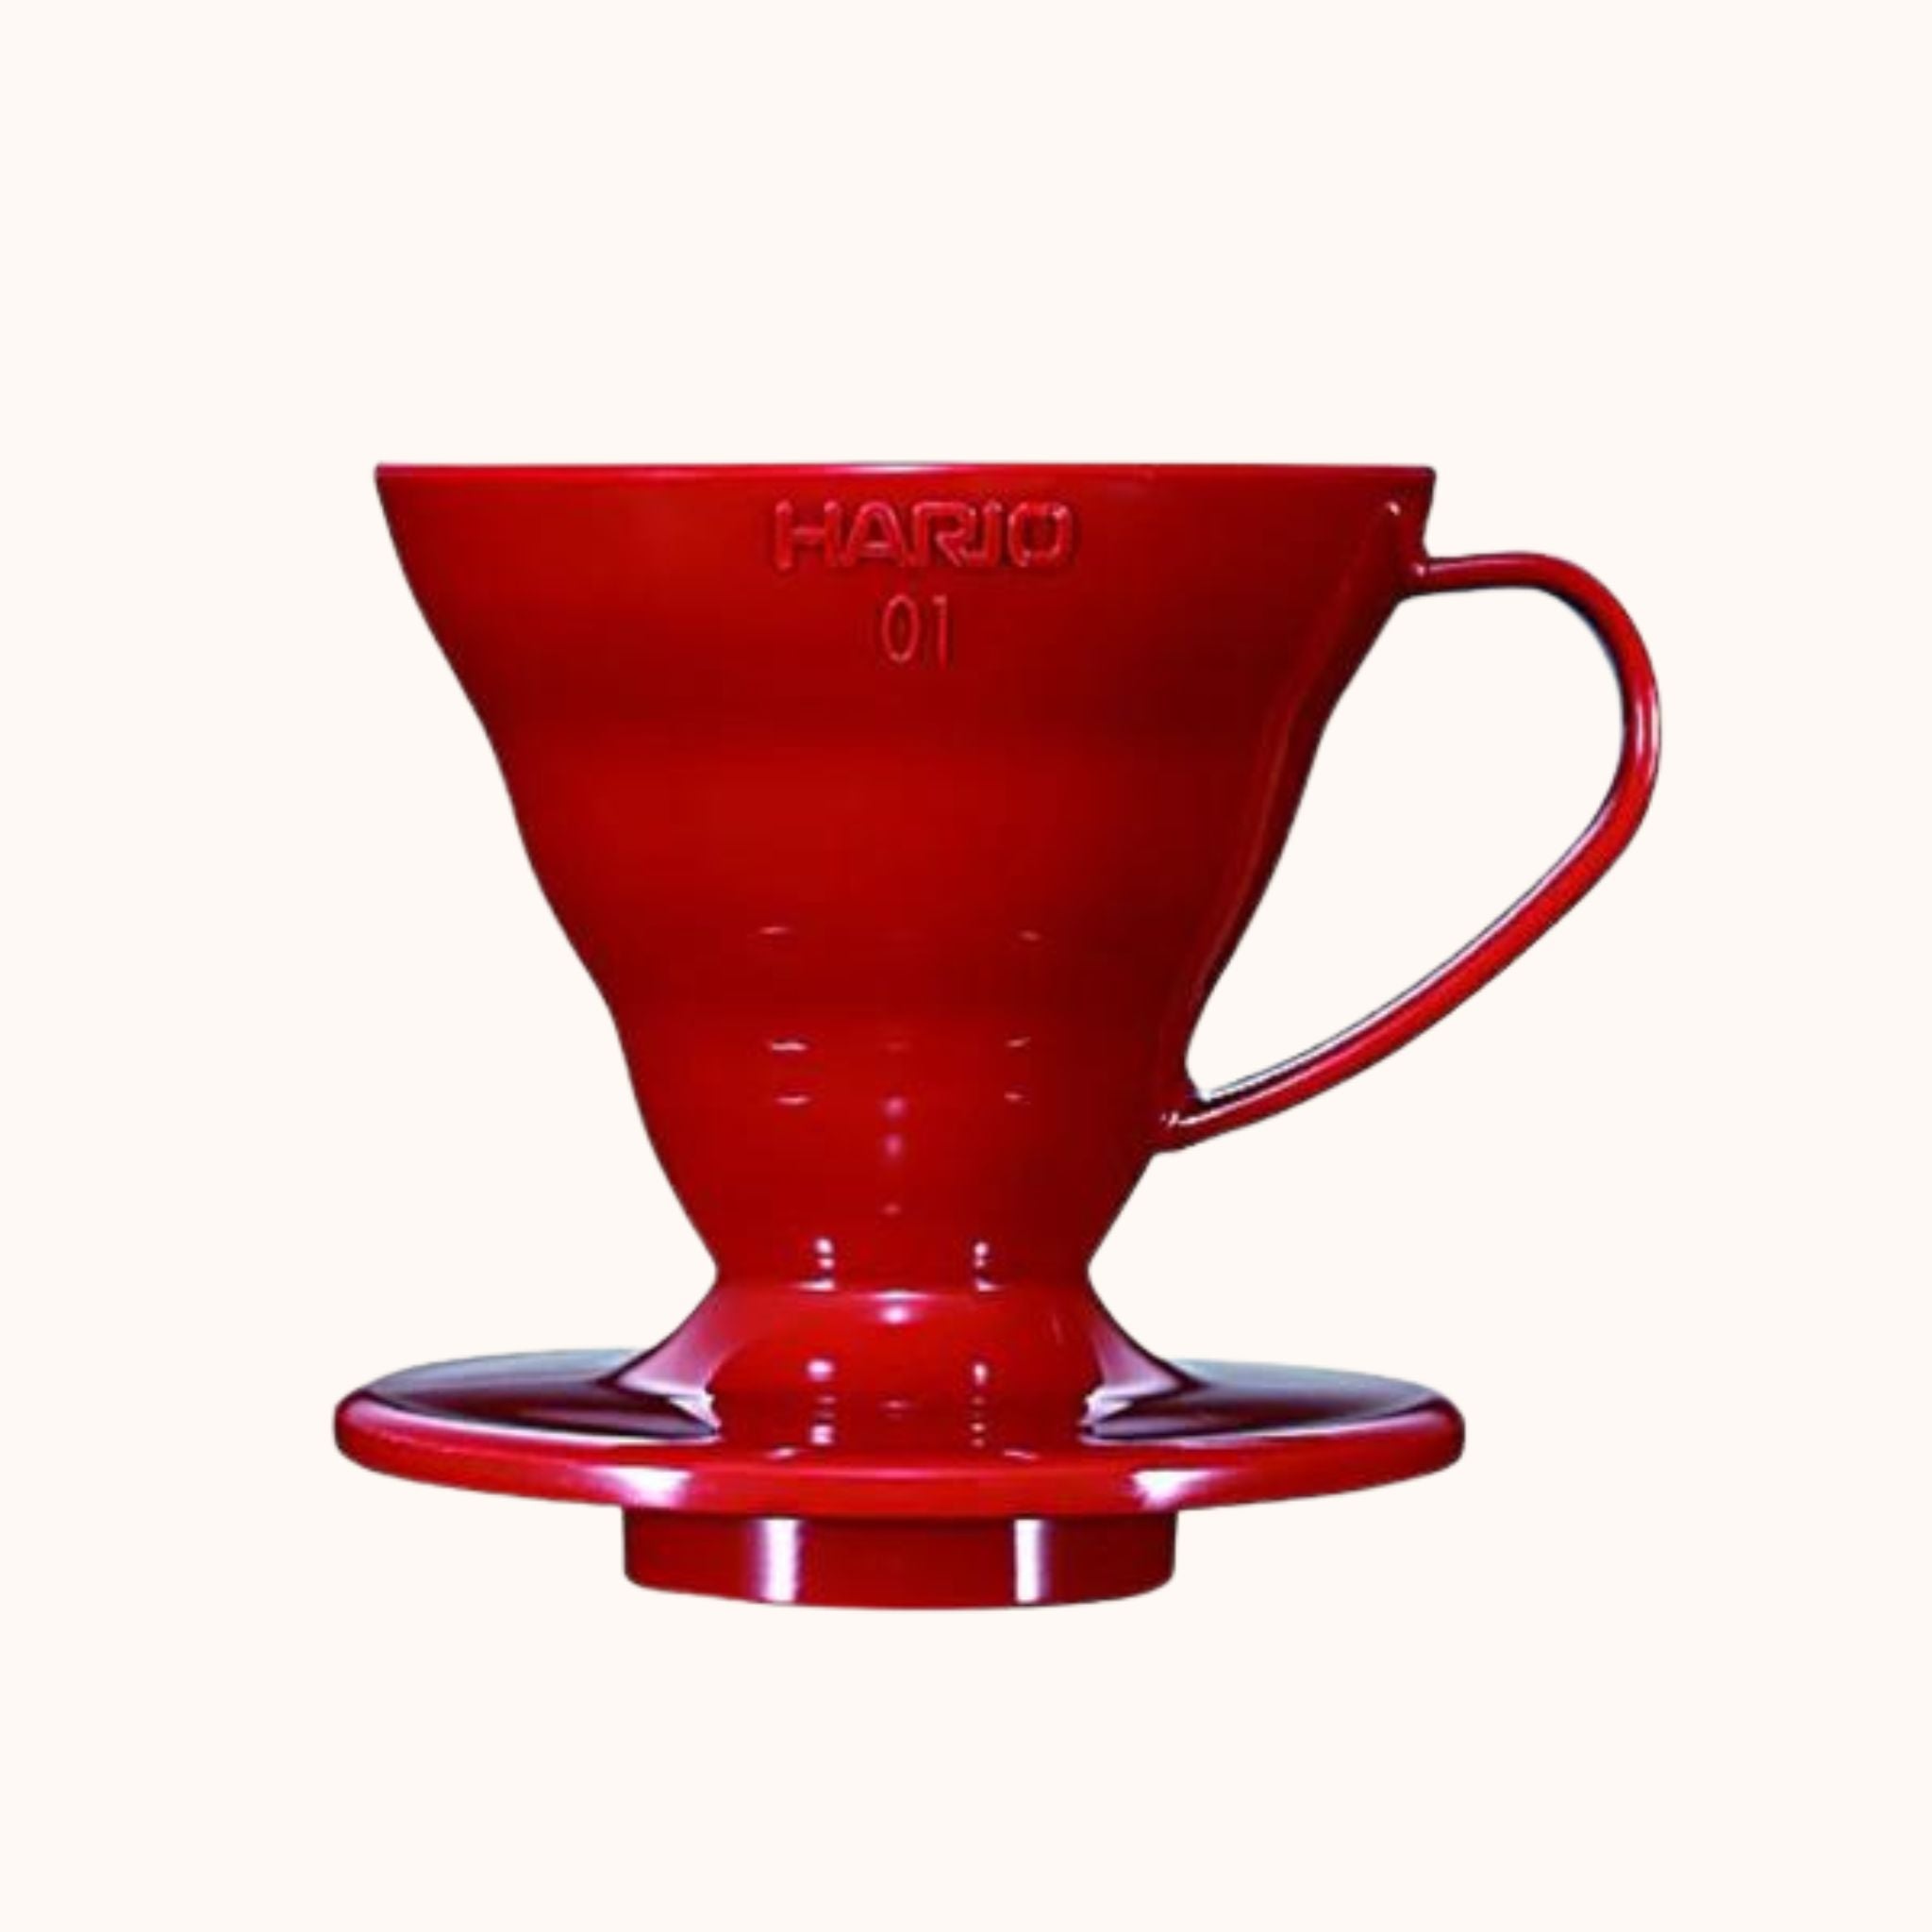 Hario 1 cup v60 brewer red